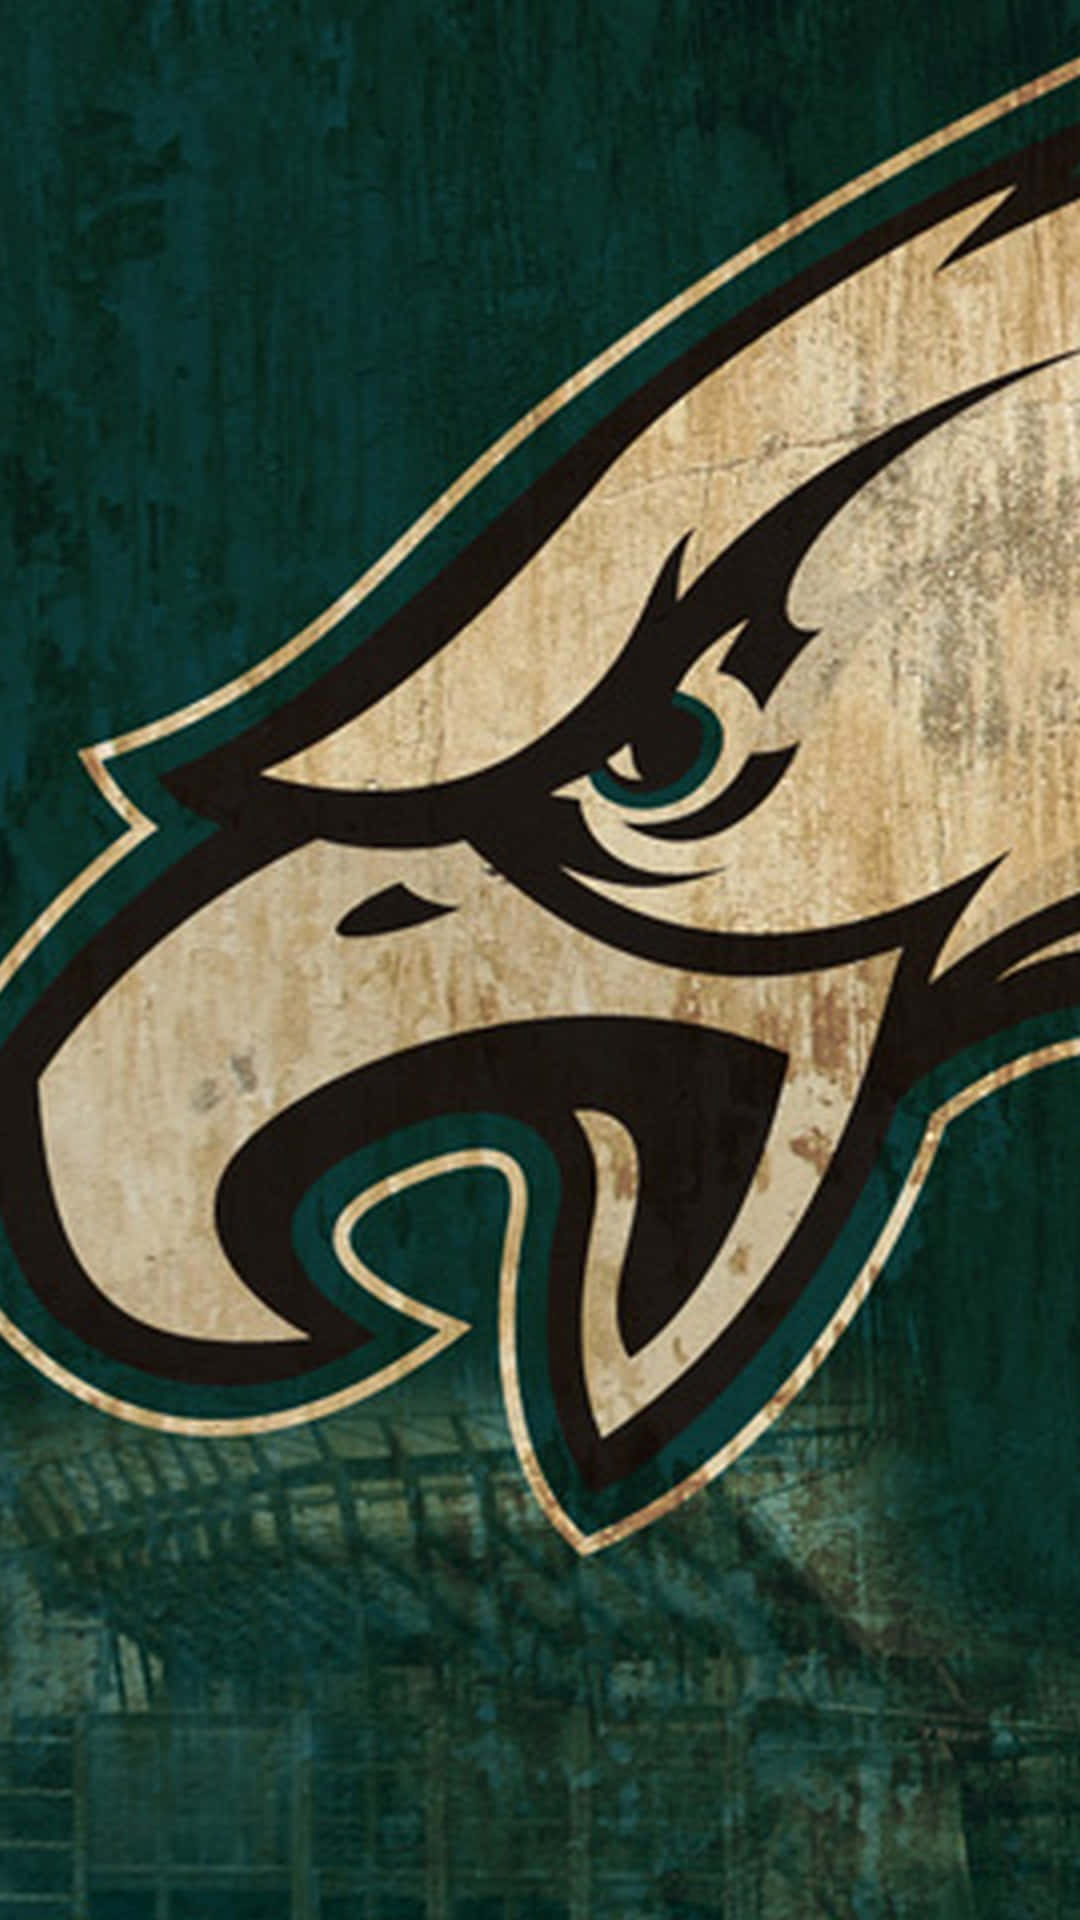 Get In The Game with the Philadelphia Eagles iPhone Wallpaper